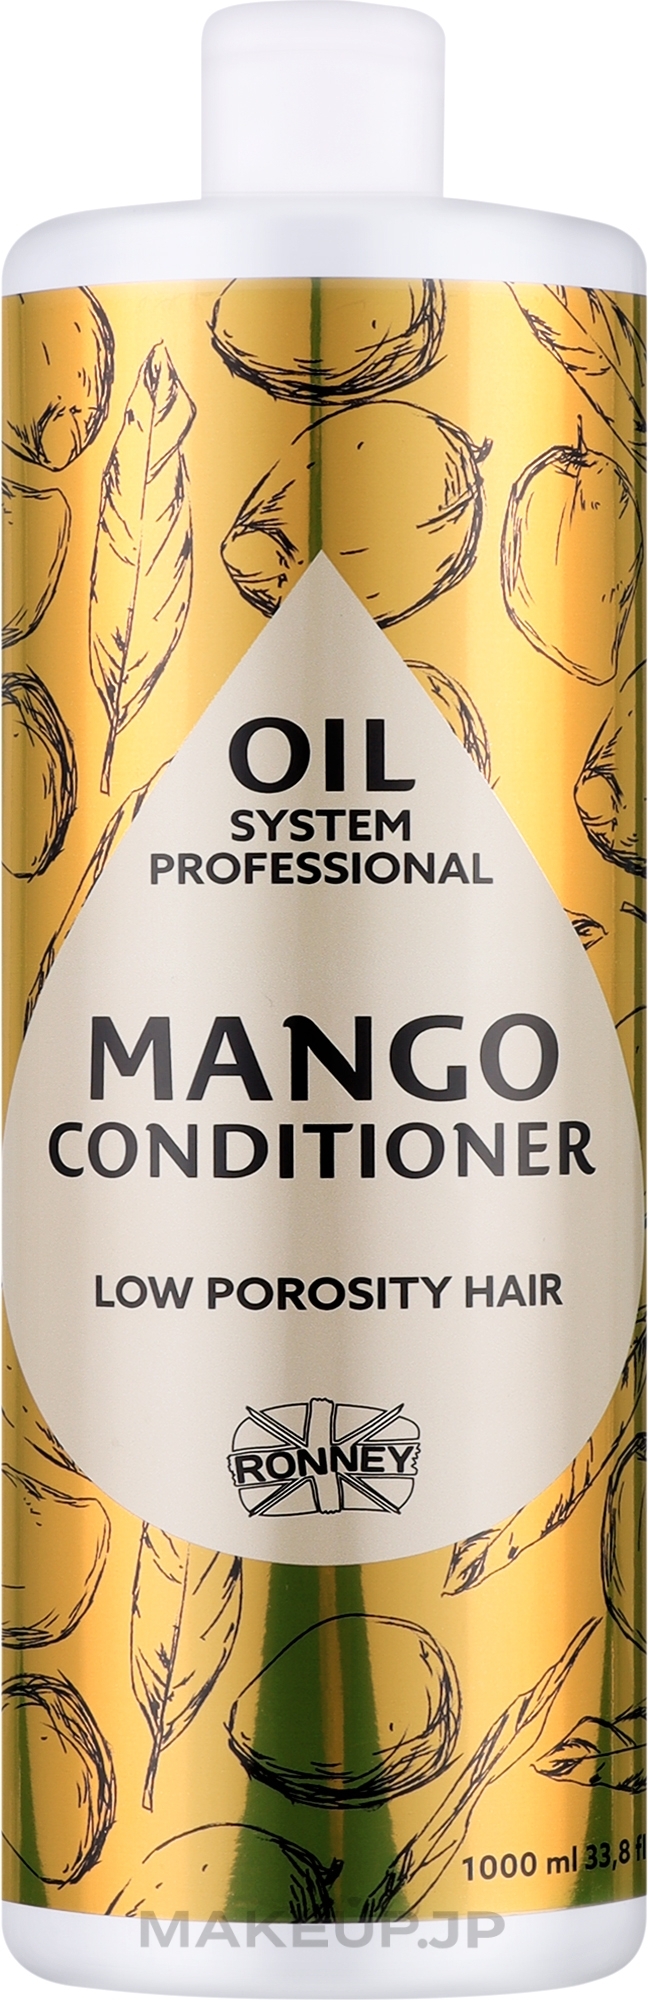 Mango Oil Conditioner for Low Porous Hair - Ronney Professional Oil System Low Porosity Hair Mango Conditioner	 — photo 1000 ml